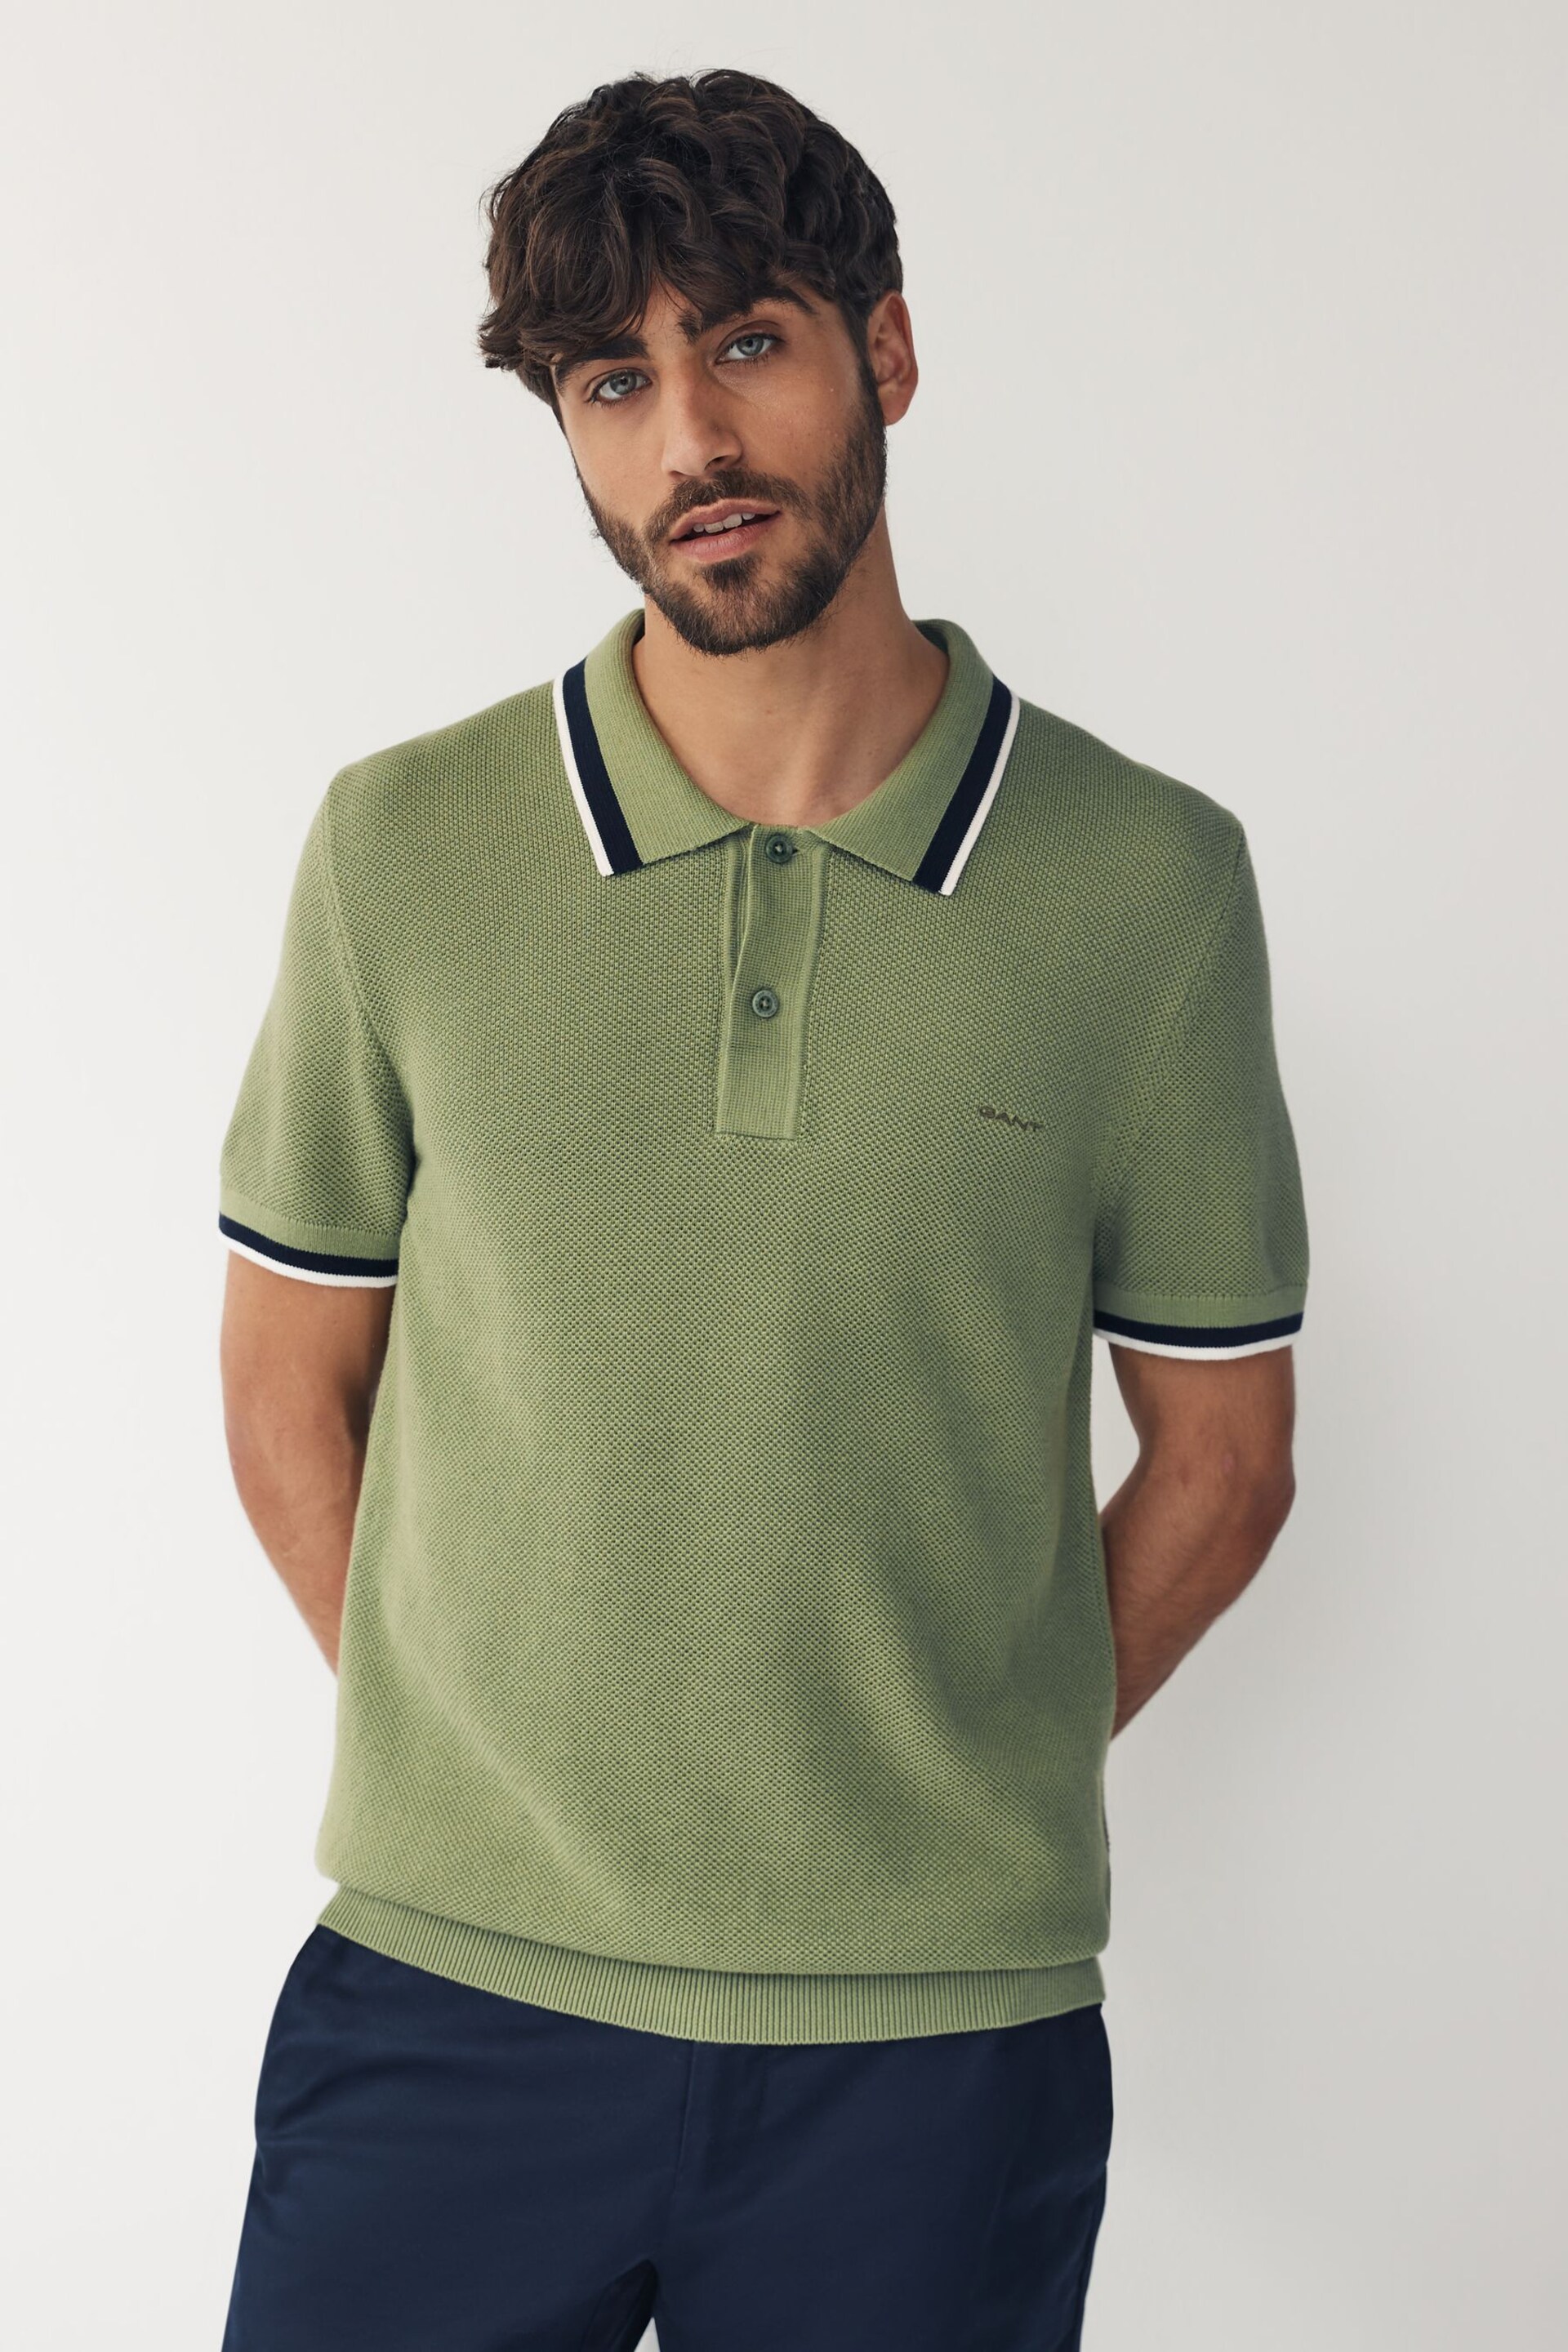 GANT Green Cotton Piqué Knitted Polo Shirt - Image 1 of 5